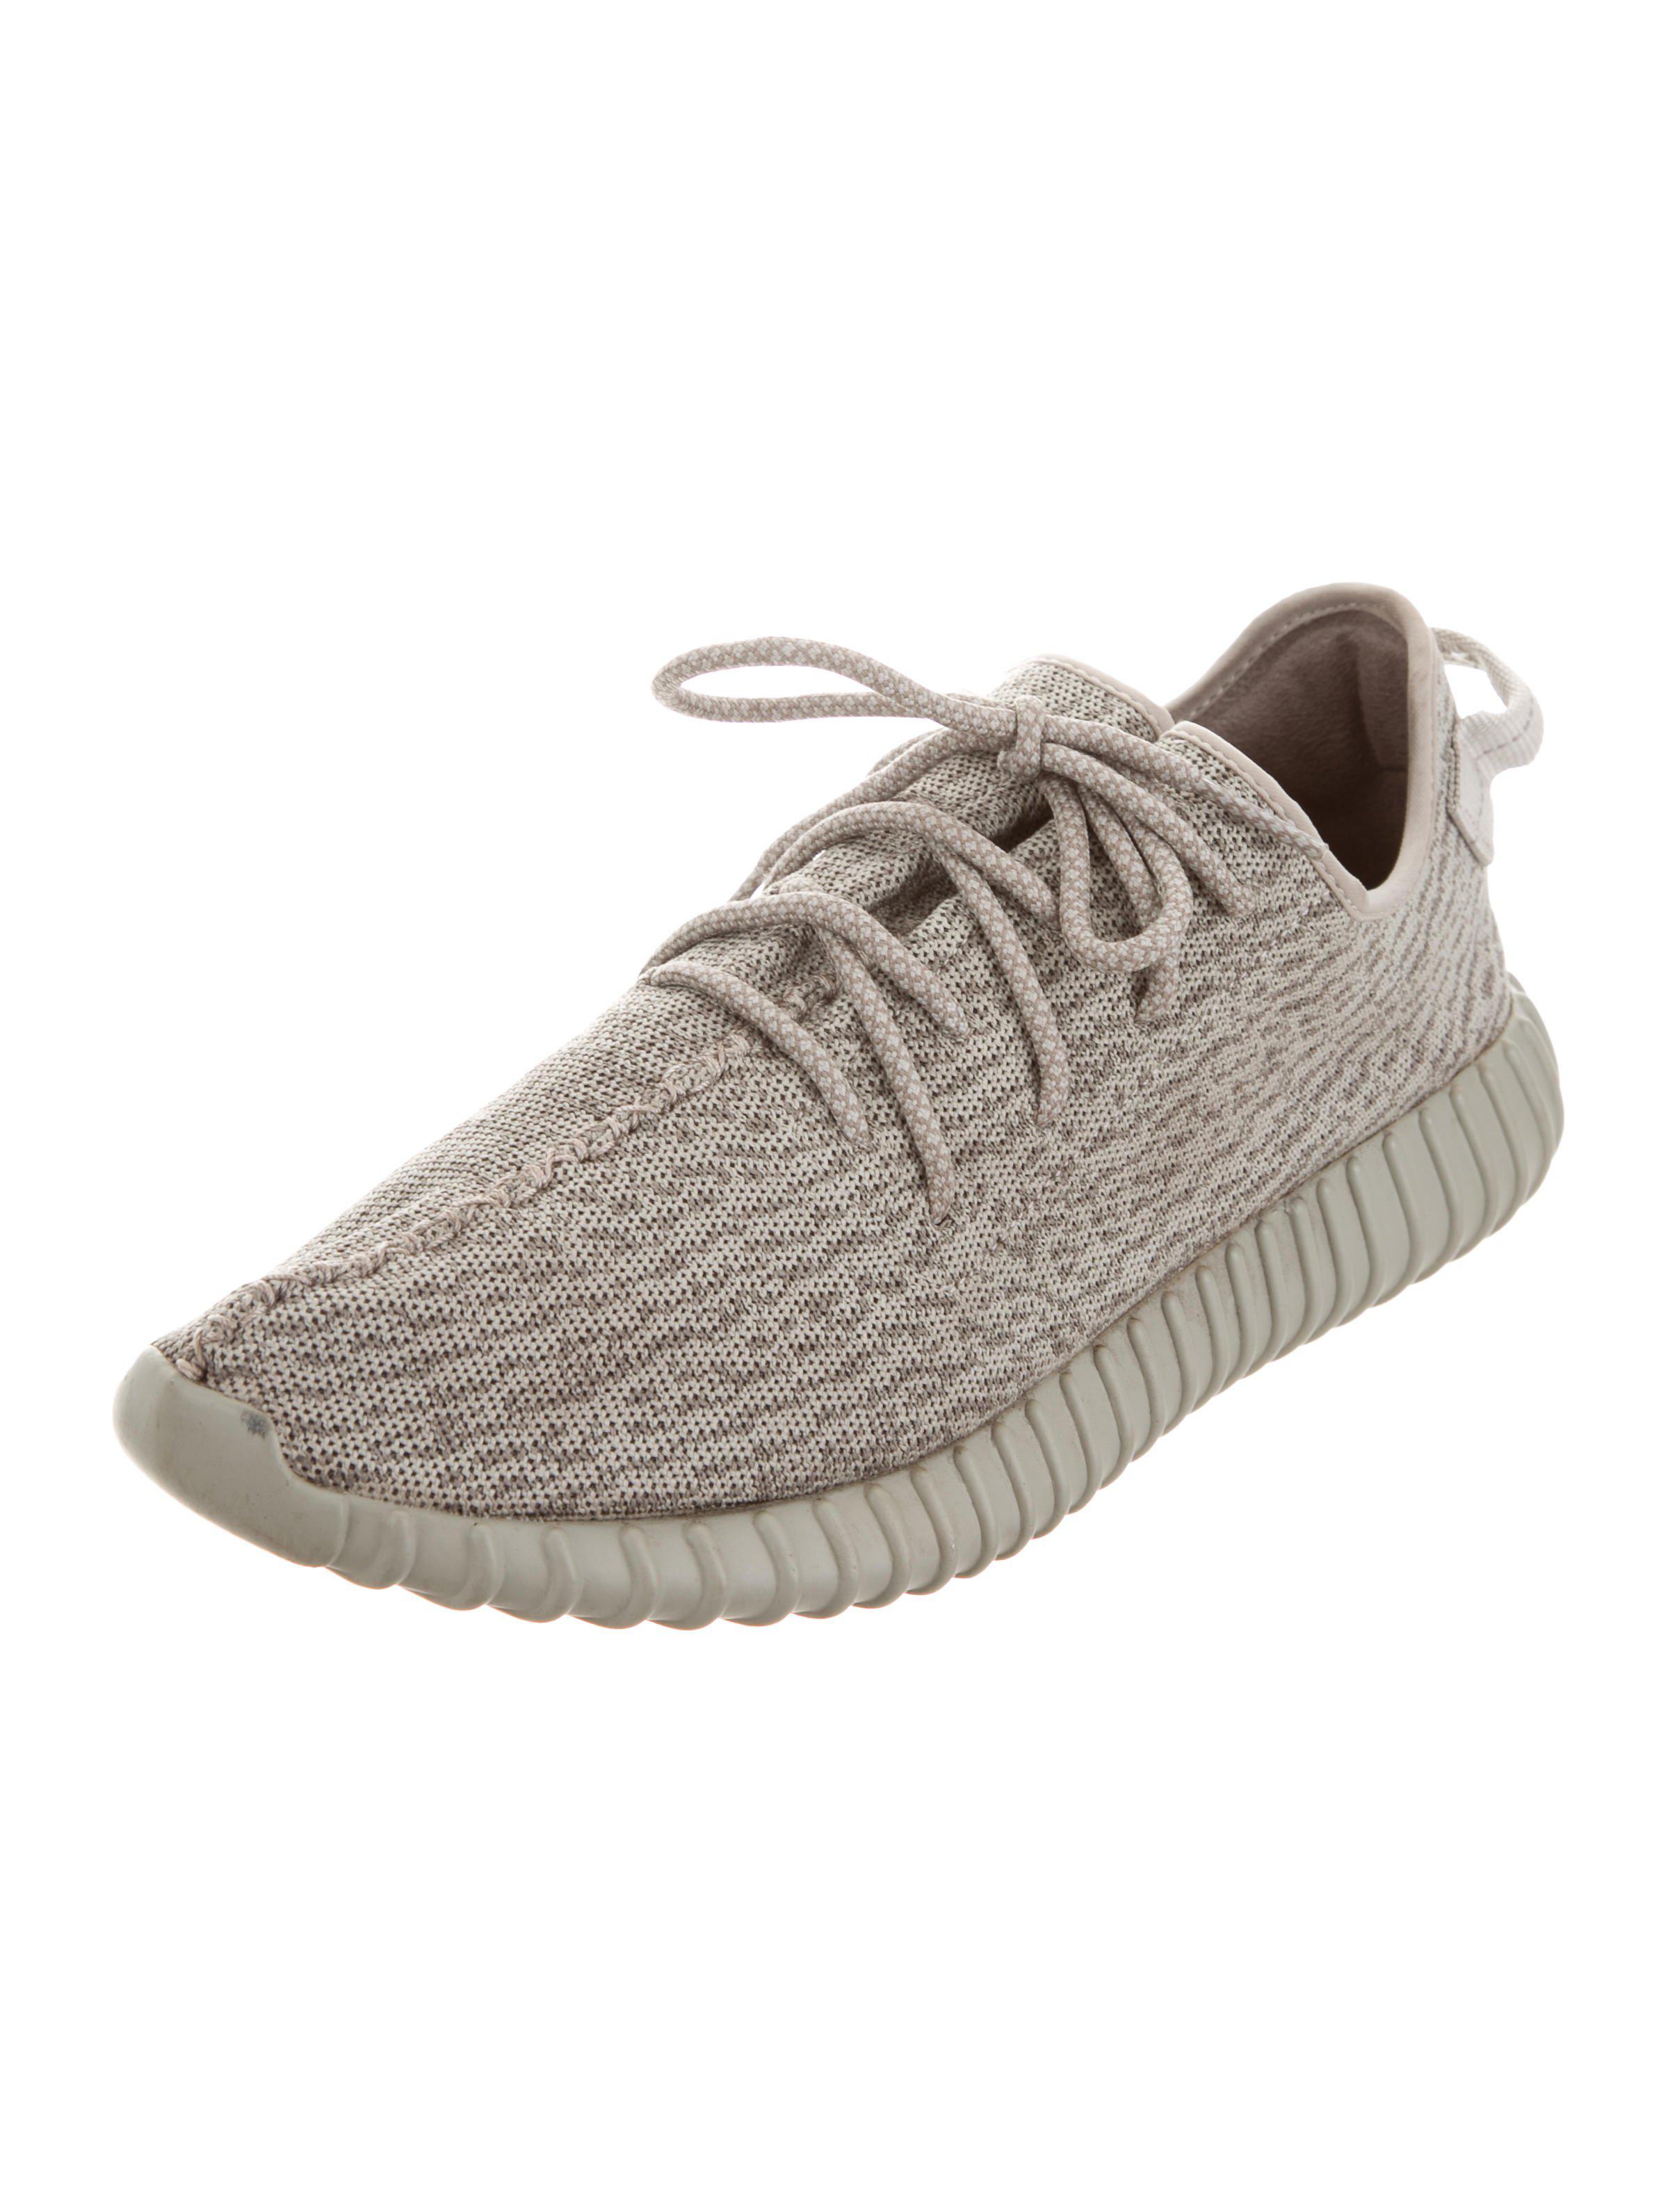 Cheap Yeezy 350 V2 Trainers for Sale, Cheap Yeezys Tranier